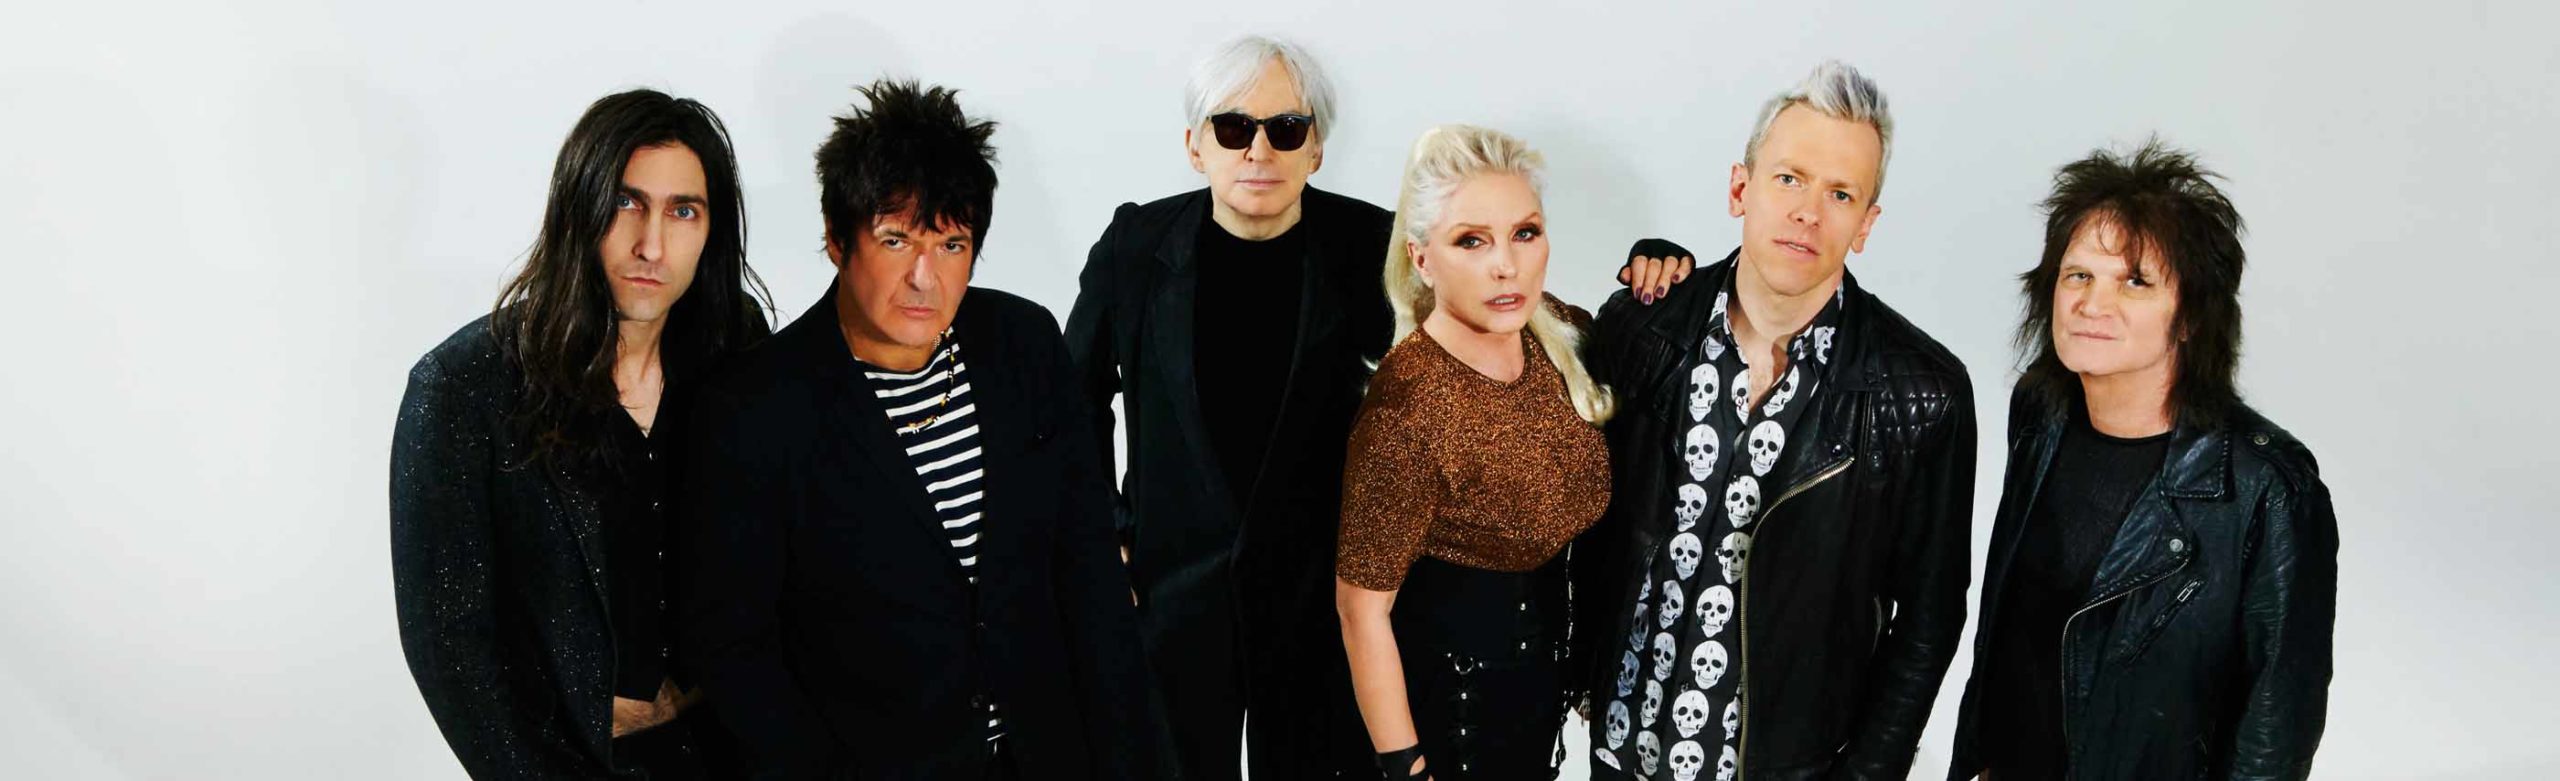 GIVEAWAY: Blondie Tickets, CD, Vinyl, and T-Shirt Image